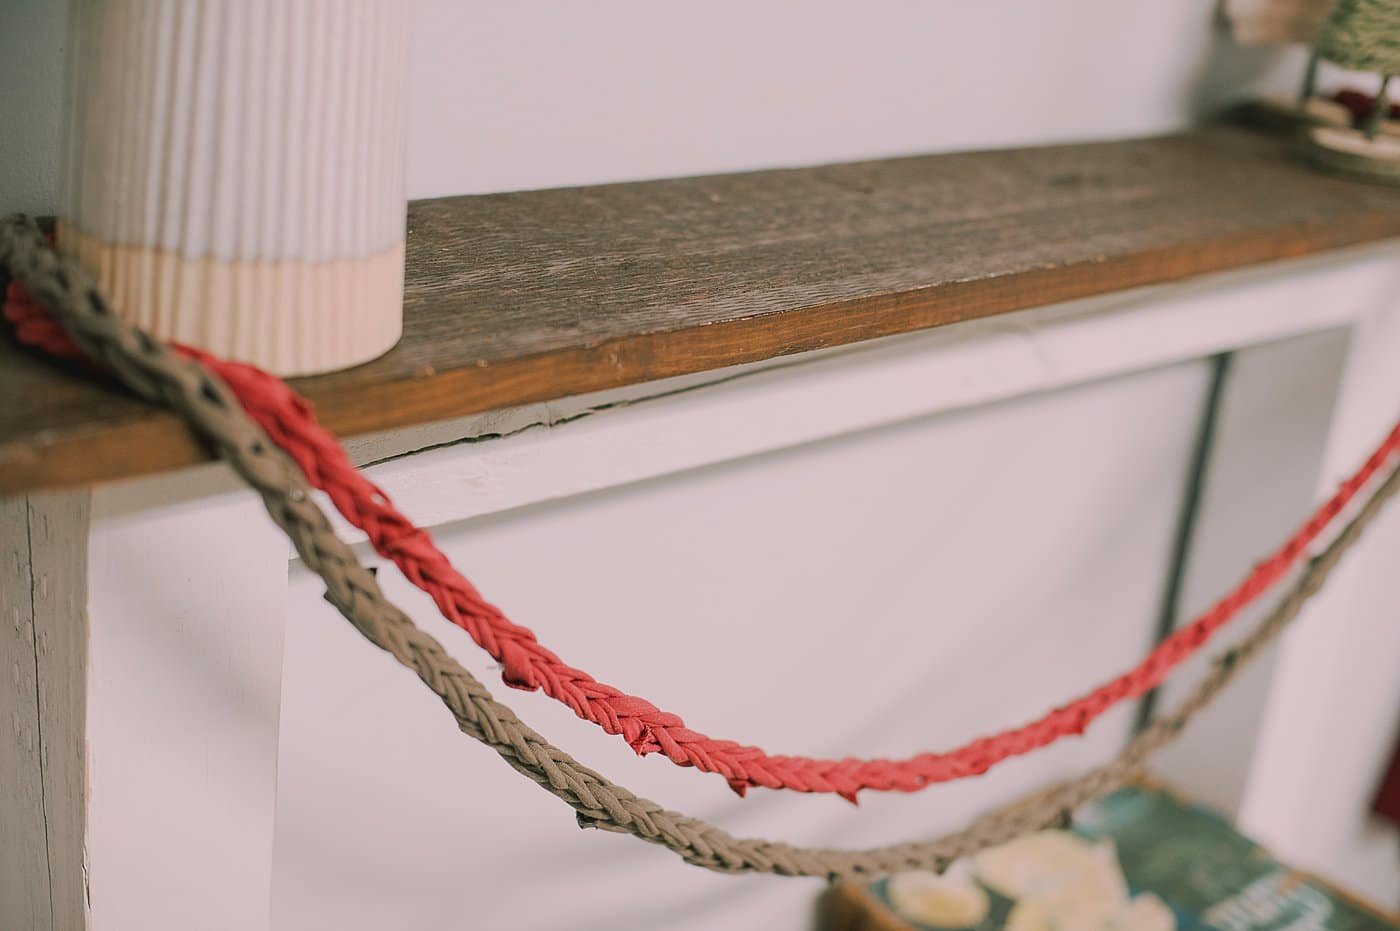 How to Make a Finger-Knit Garland using T-Shirt Yarn.